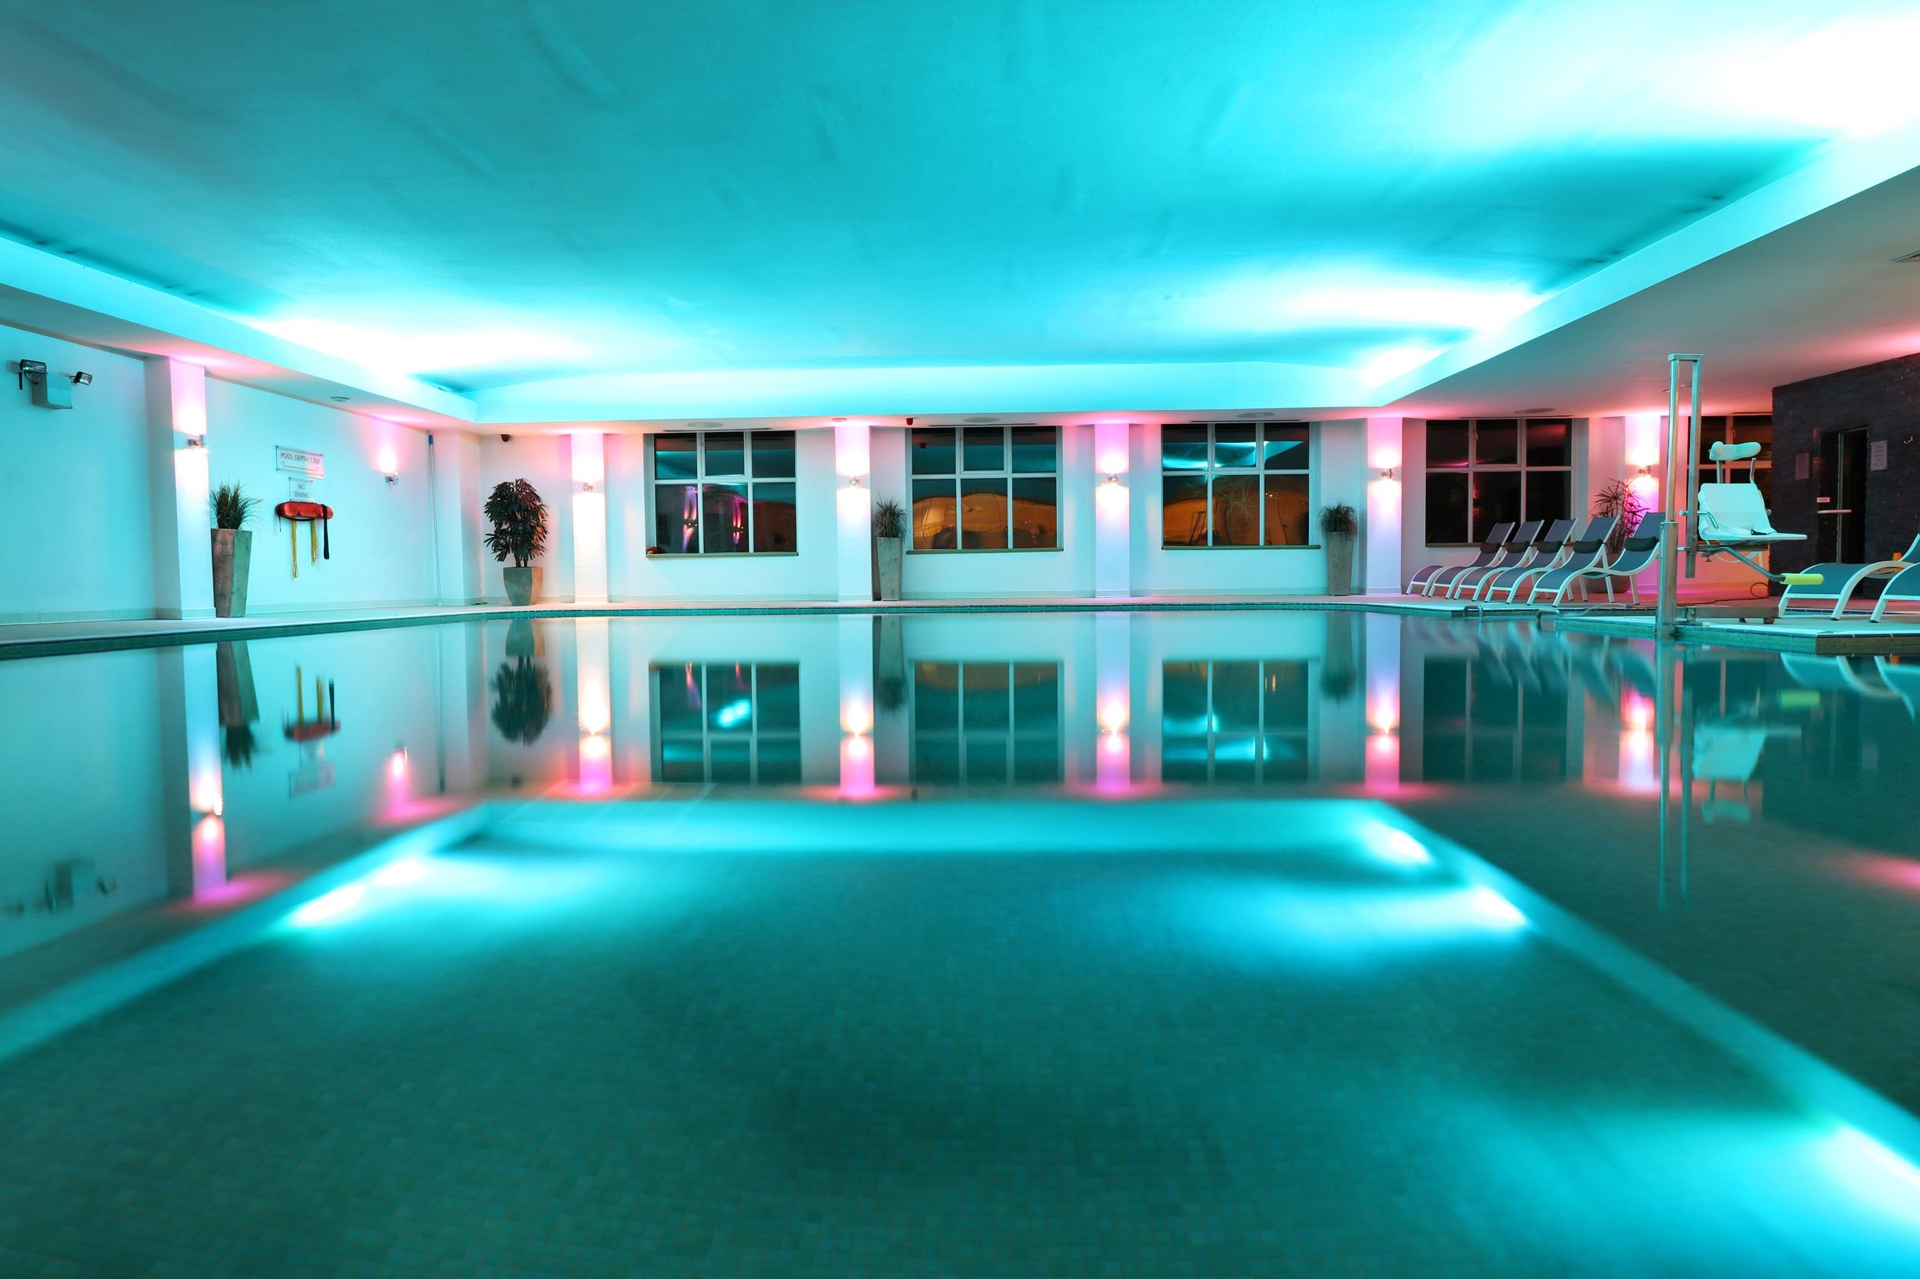 The spa pool with blue and pink lighting